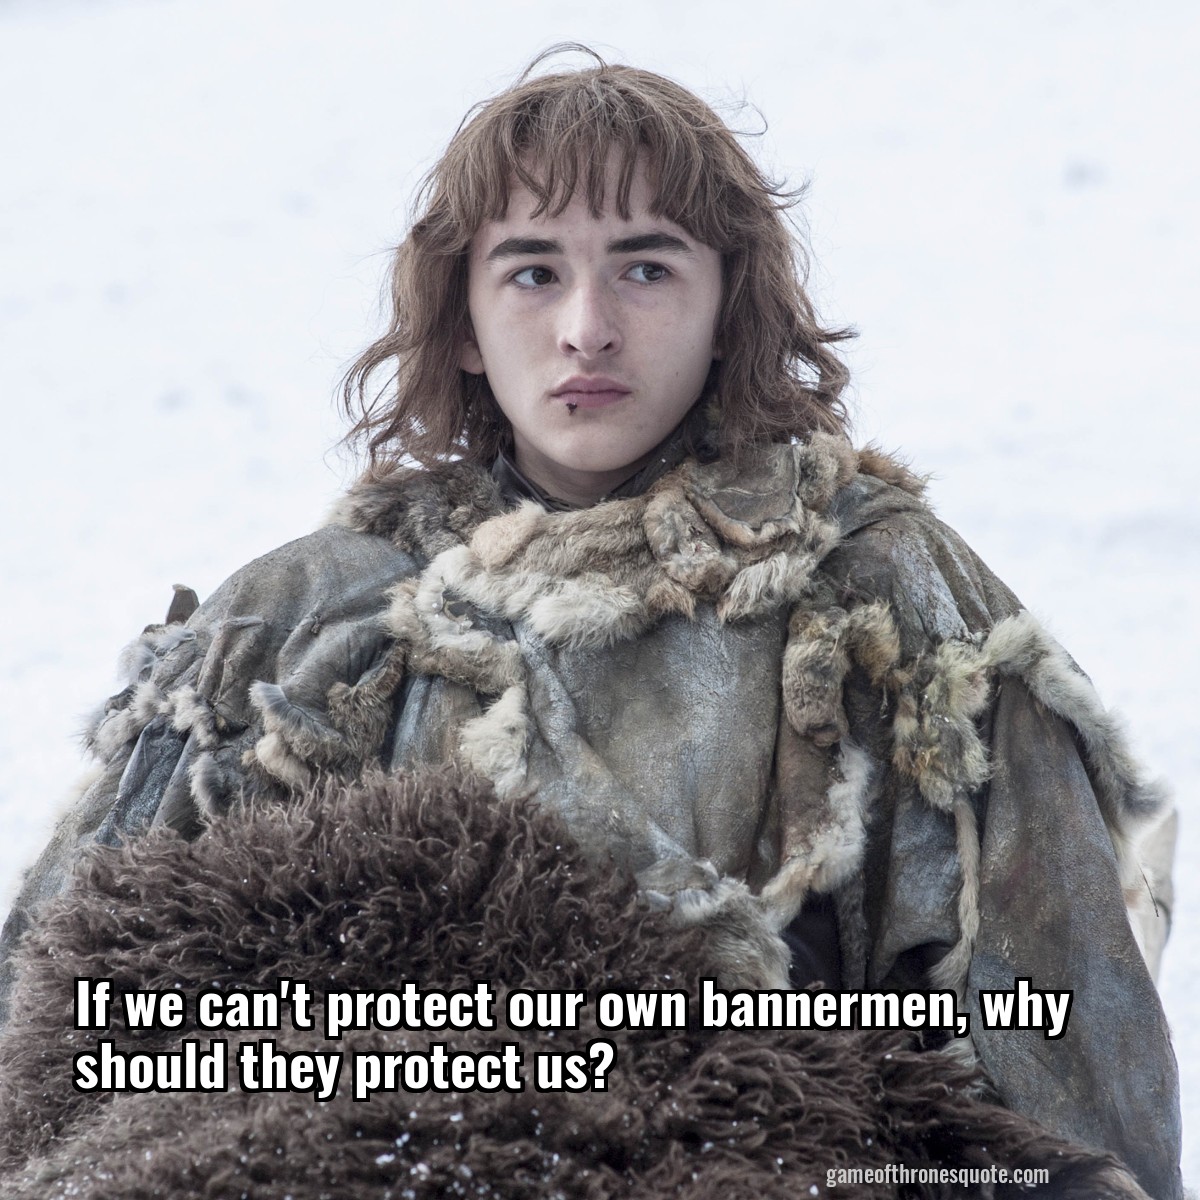 If we can't protect our own bannermen, why should they protect us?